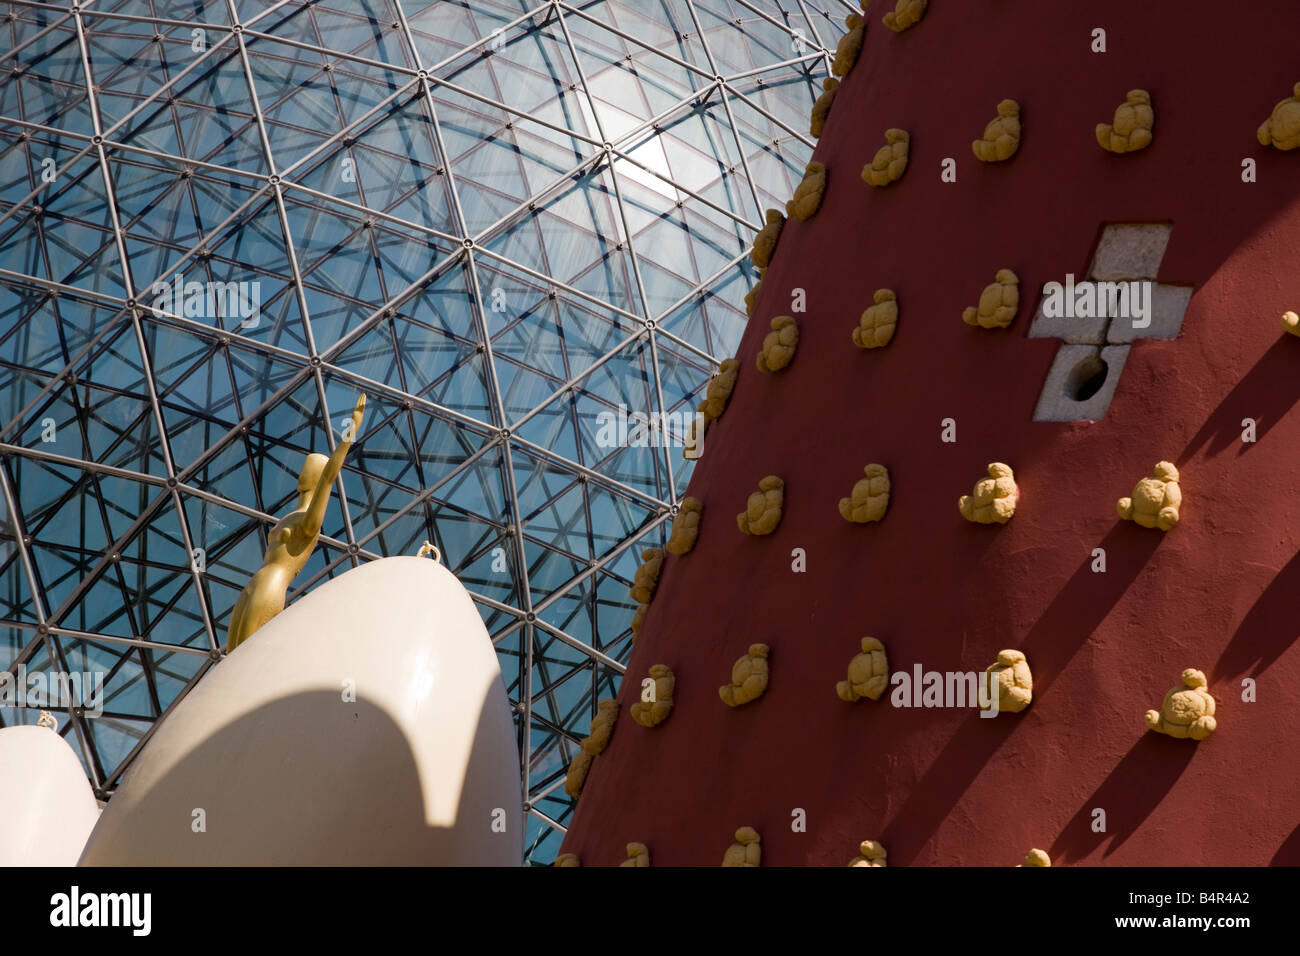 Roof, glass dome and wall detail of Dali Museum, Figueras, Spain Stock Photo